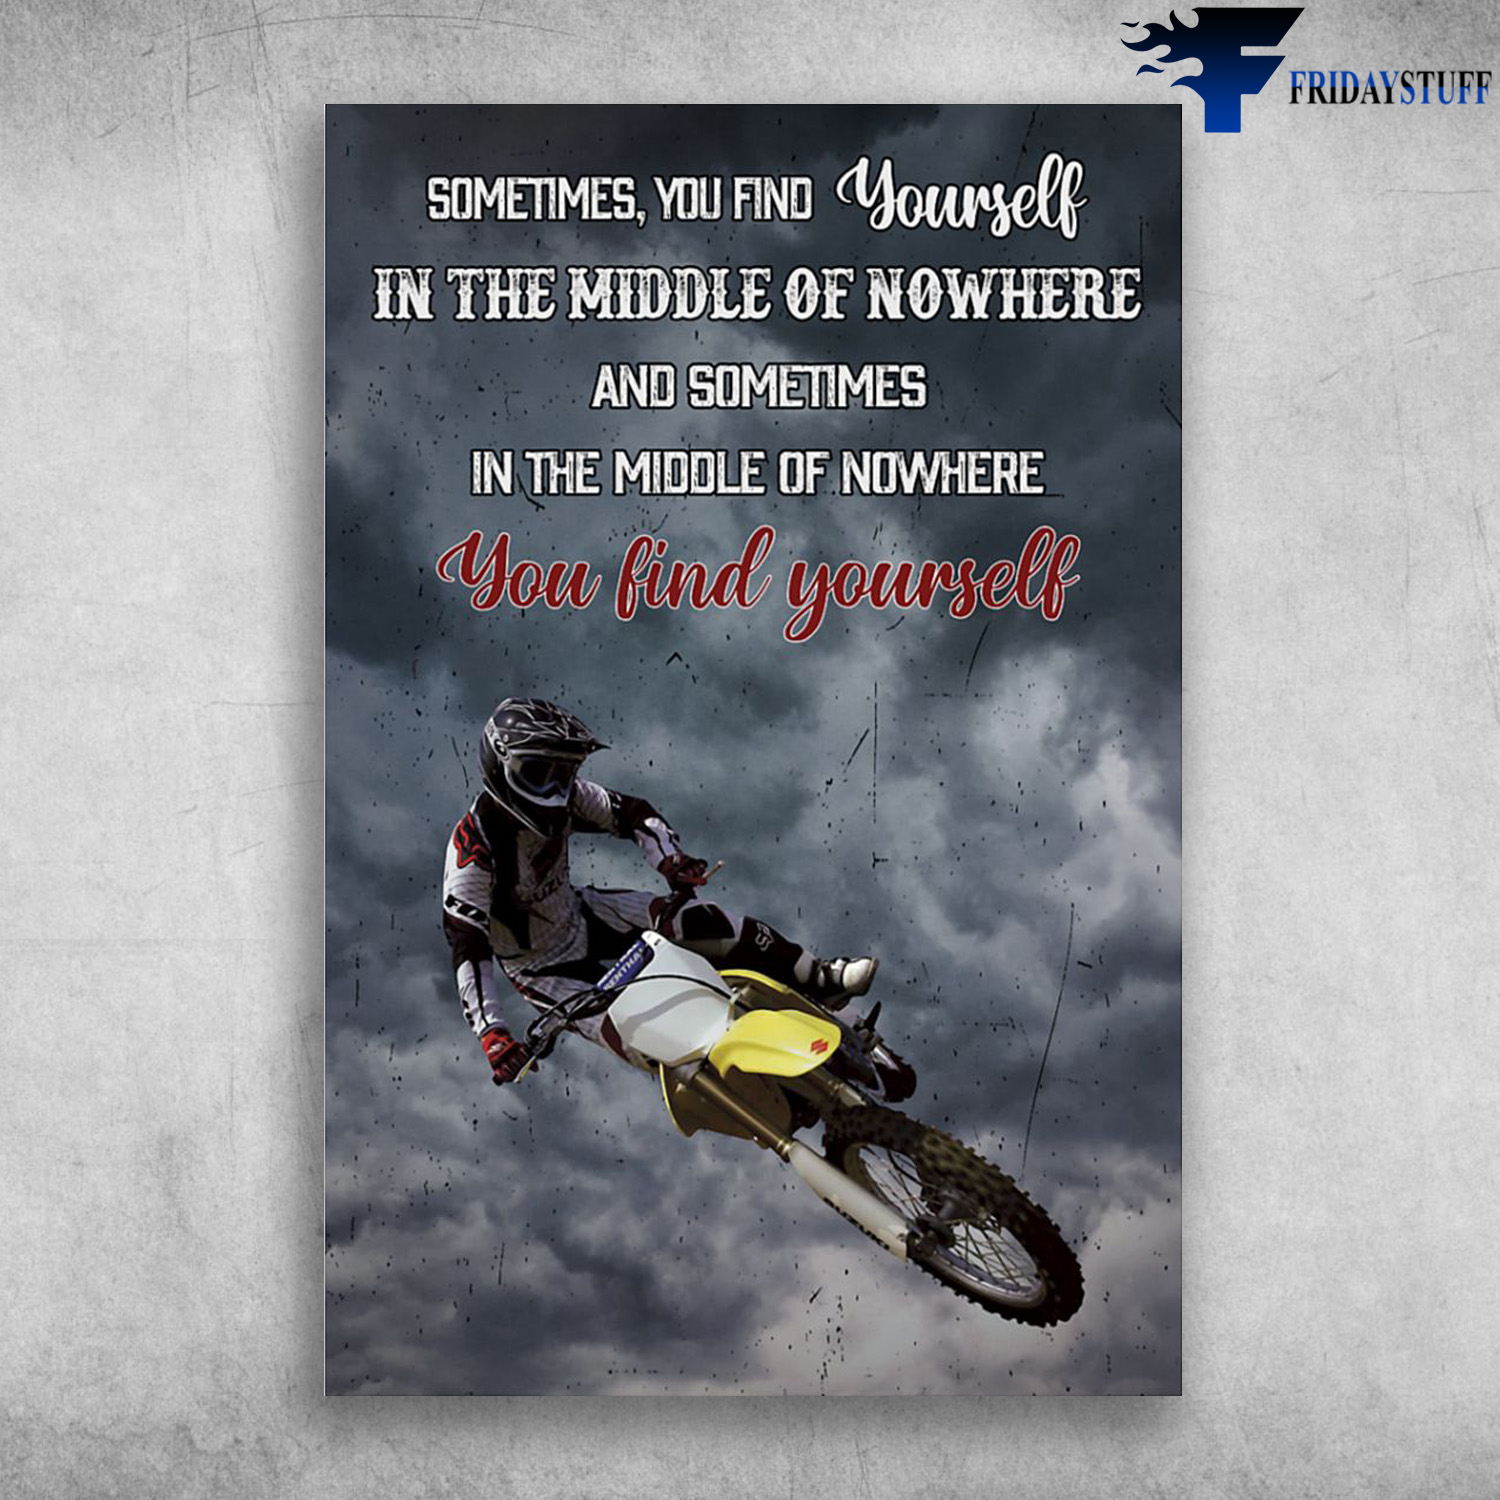 Motocross Man - Sometimes You Fine Yourself In The Middle Of Nowhere, You Find Yourself